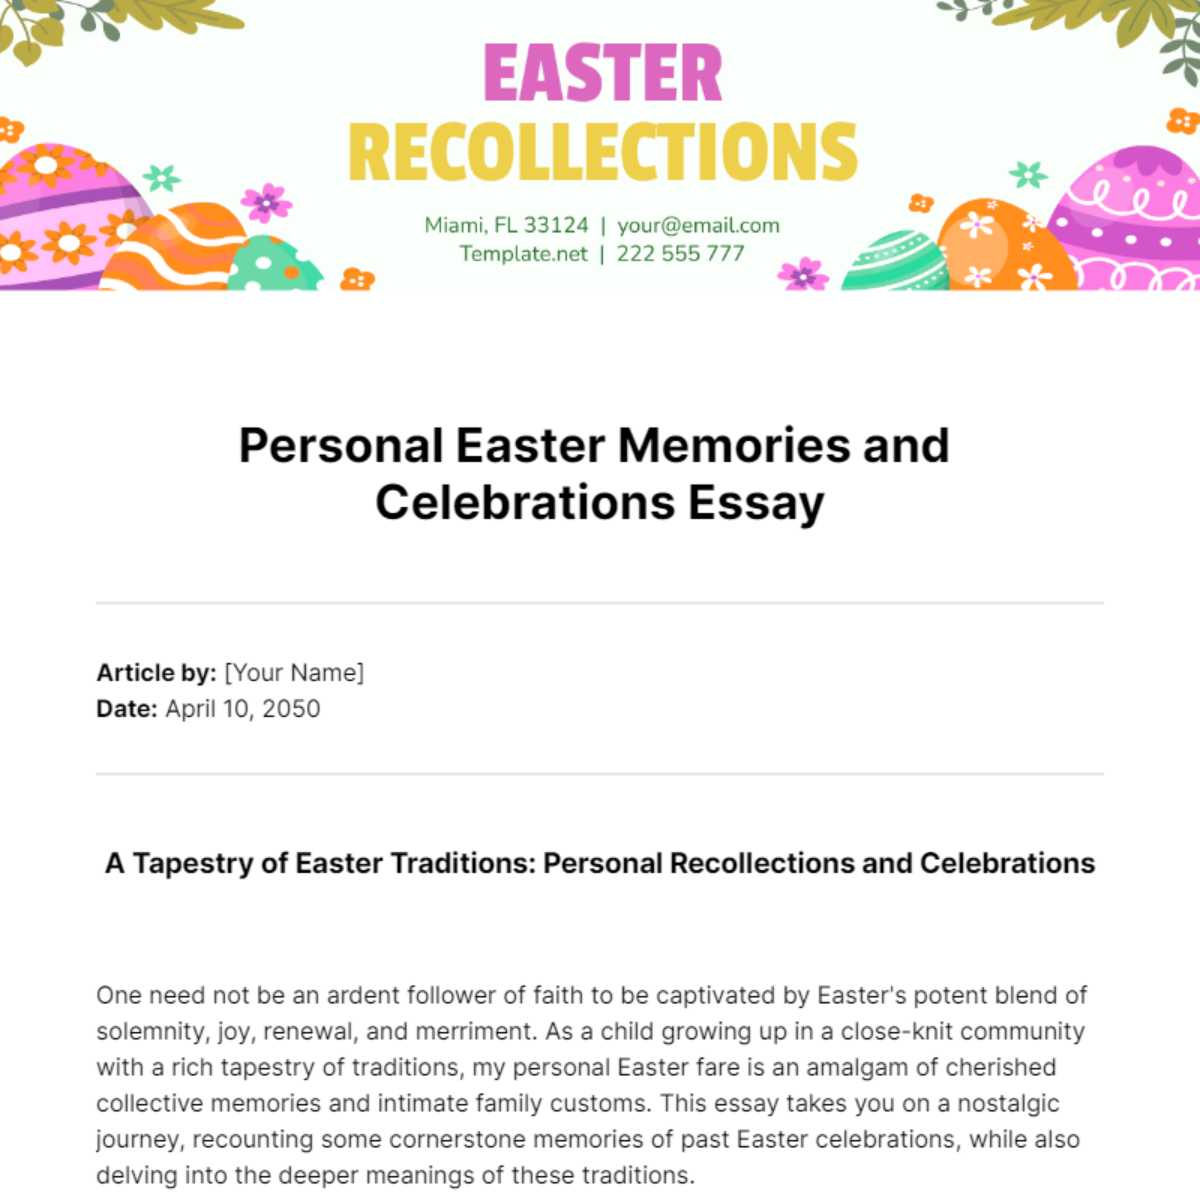 Free Personal Easter Memories and Celebrations Essay Template